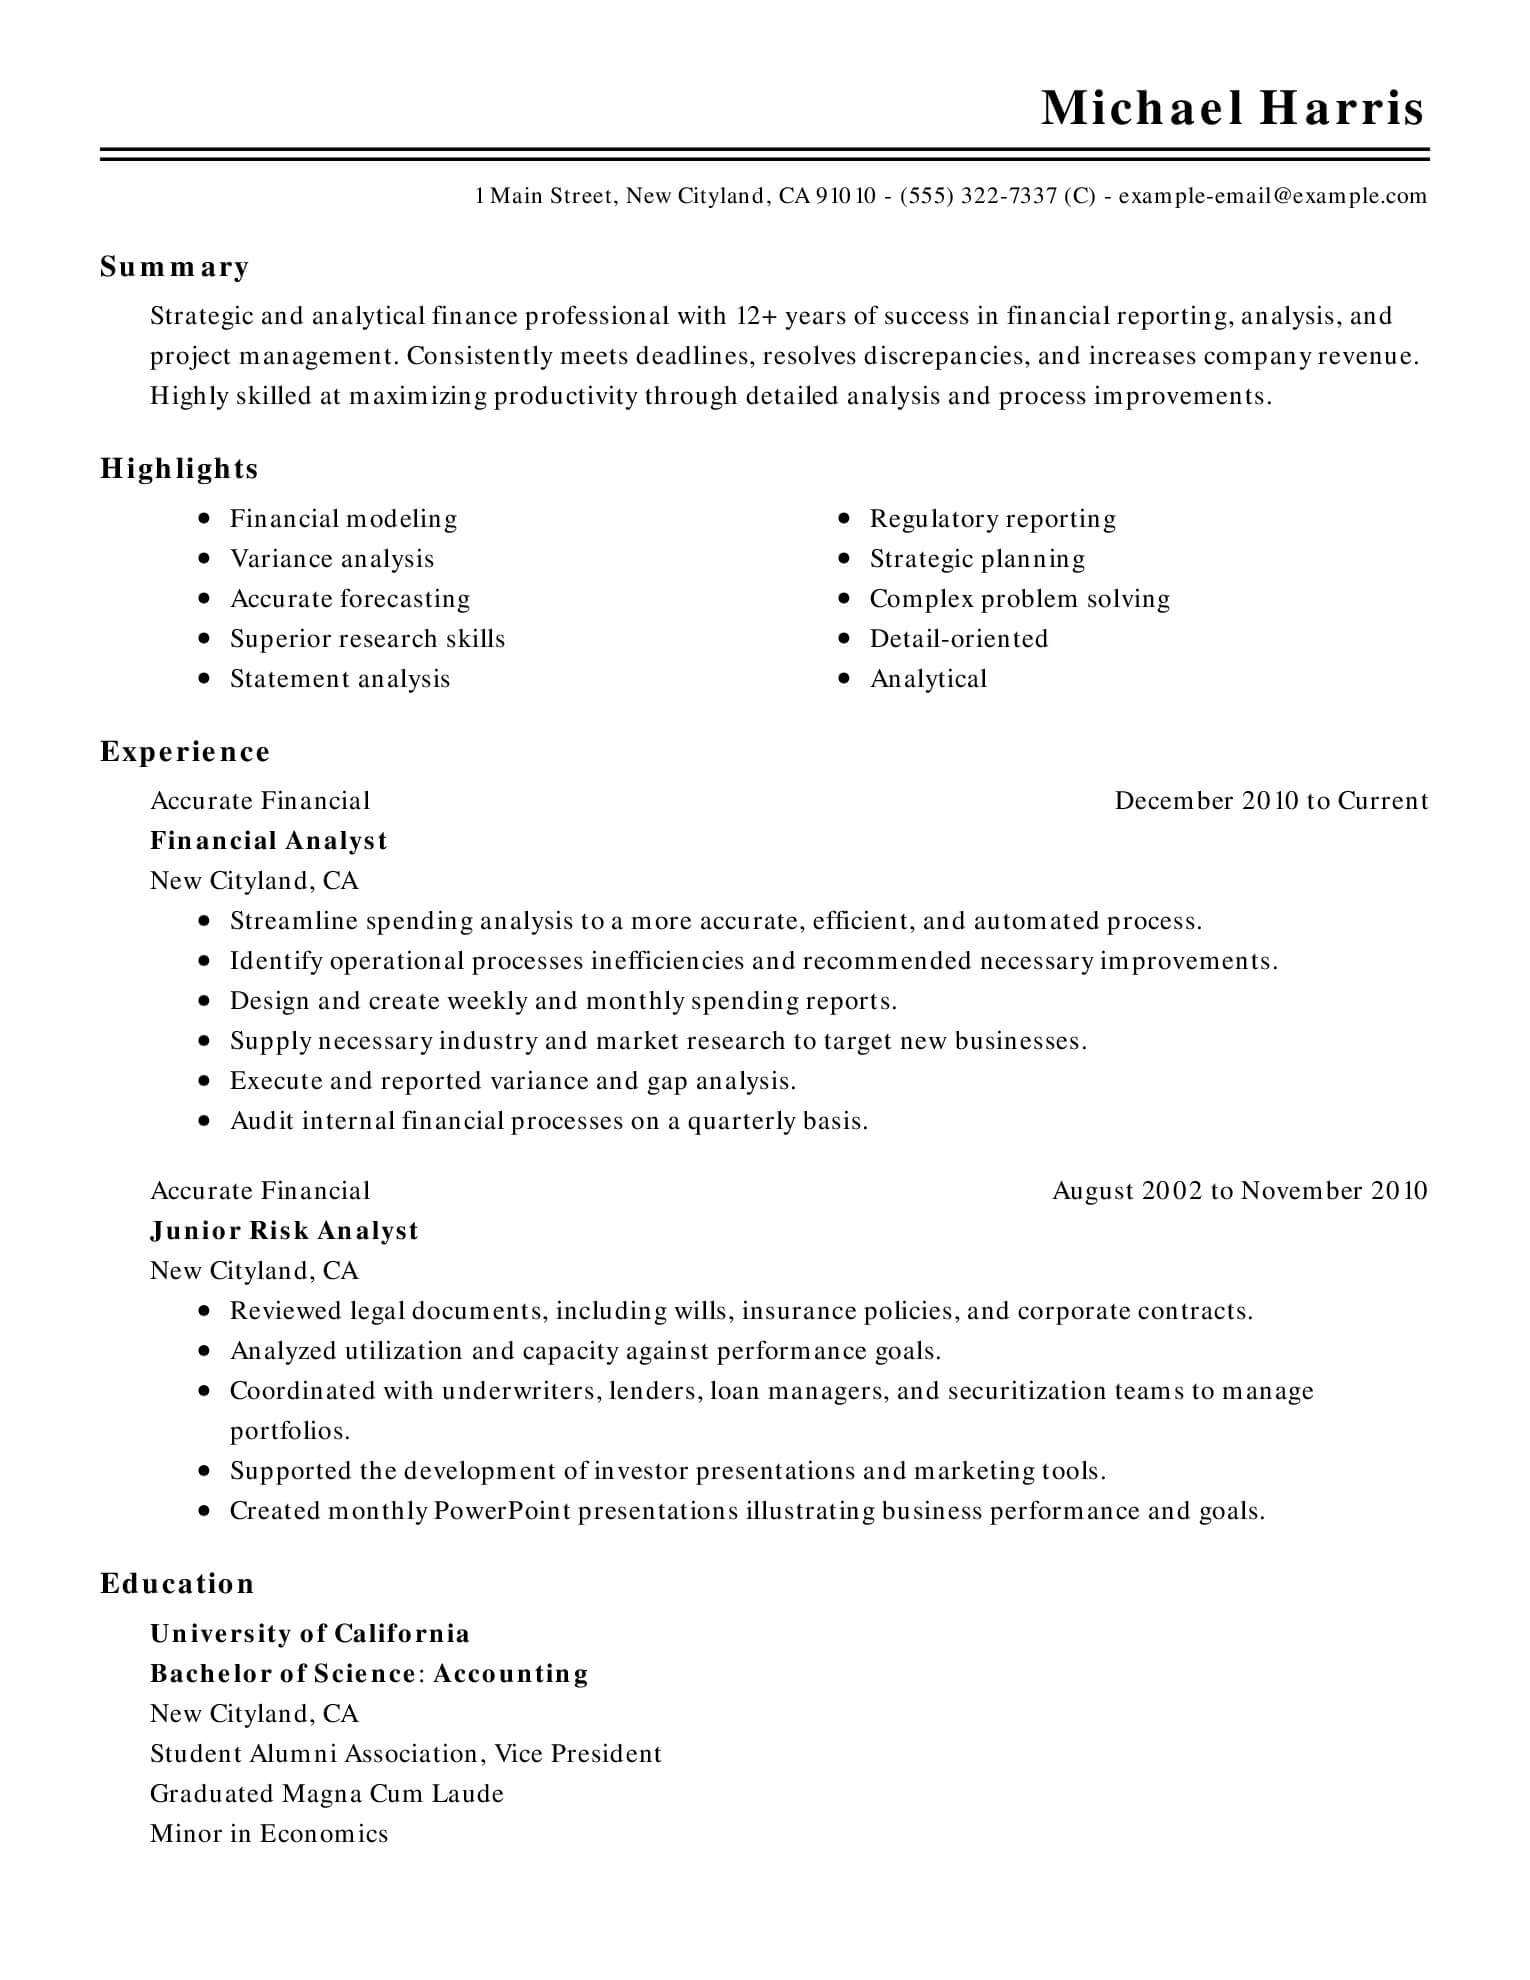 Basic Resume Template For Microsoft Word | Livecareer Intended For Simple Resume Template Microsoft Word